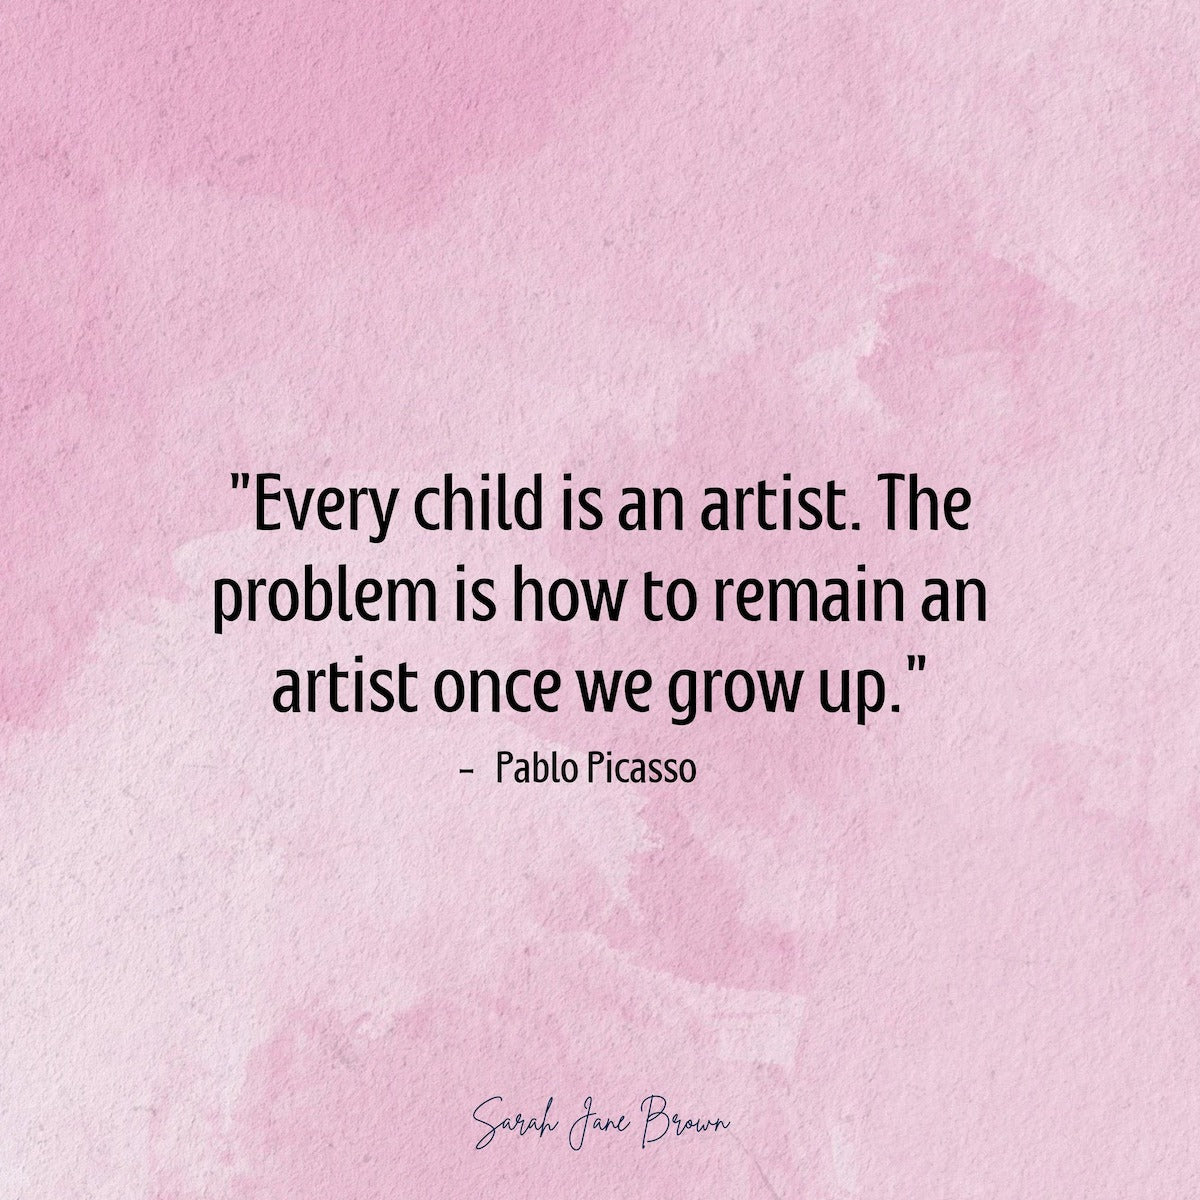 Quote of the day: Pablo Picasso